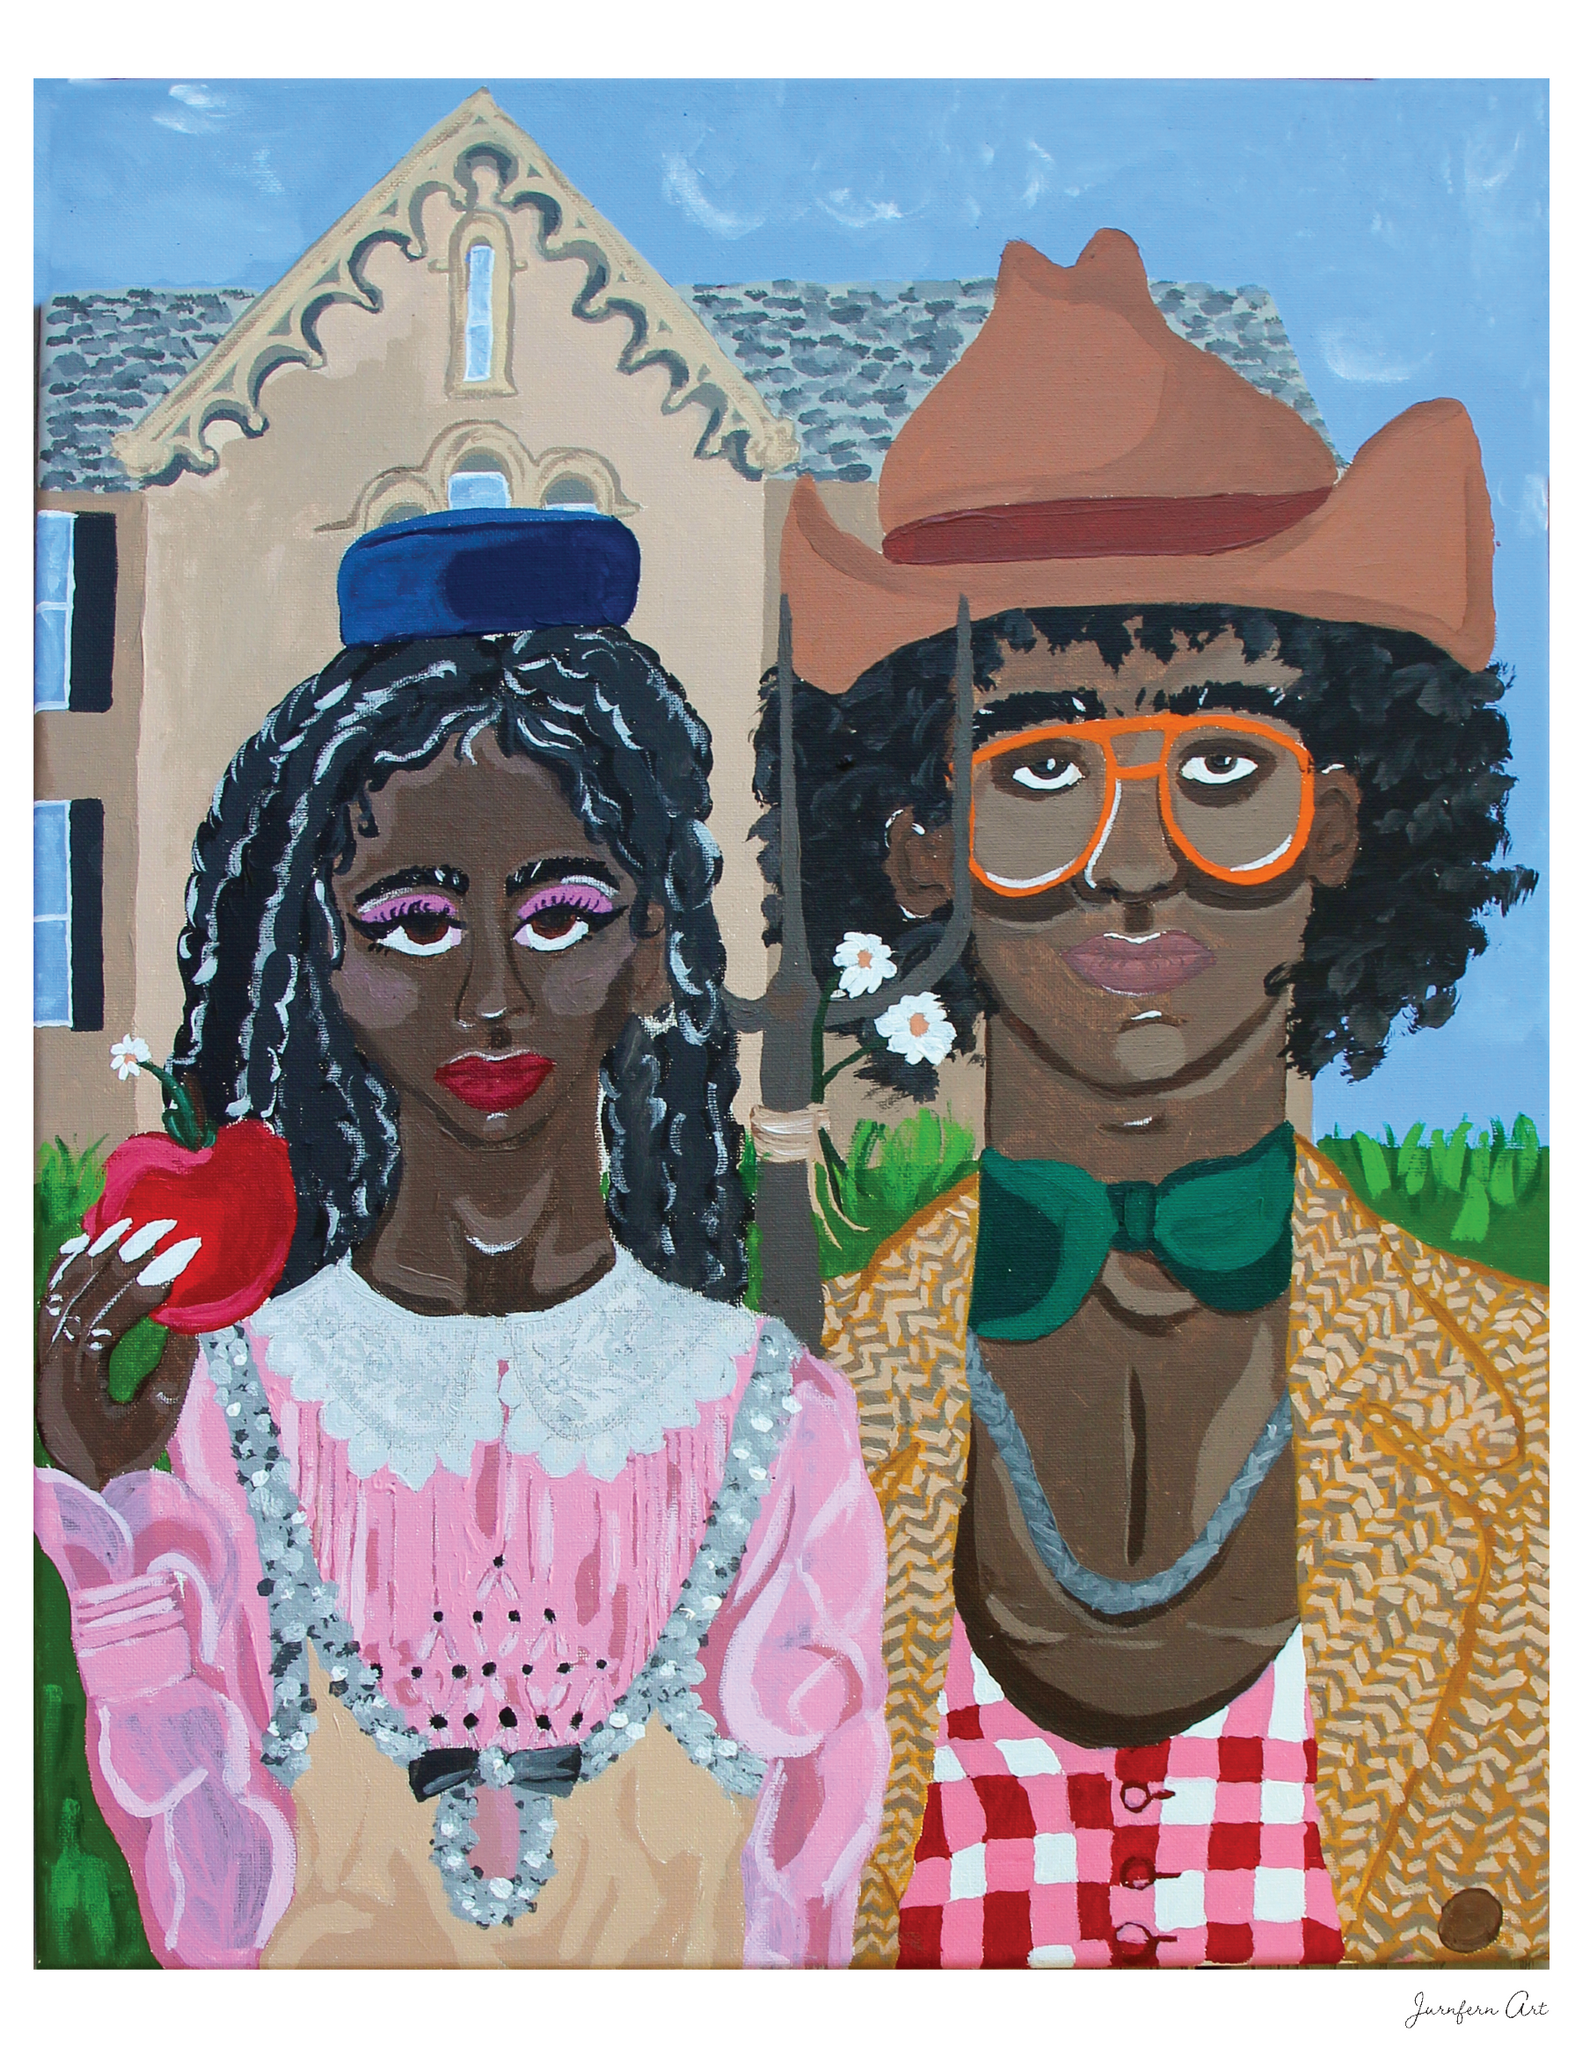 A painting reminiscent of the classic American Gothic, but with a Black couple wearing 'rural' outfits by Gucci